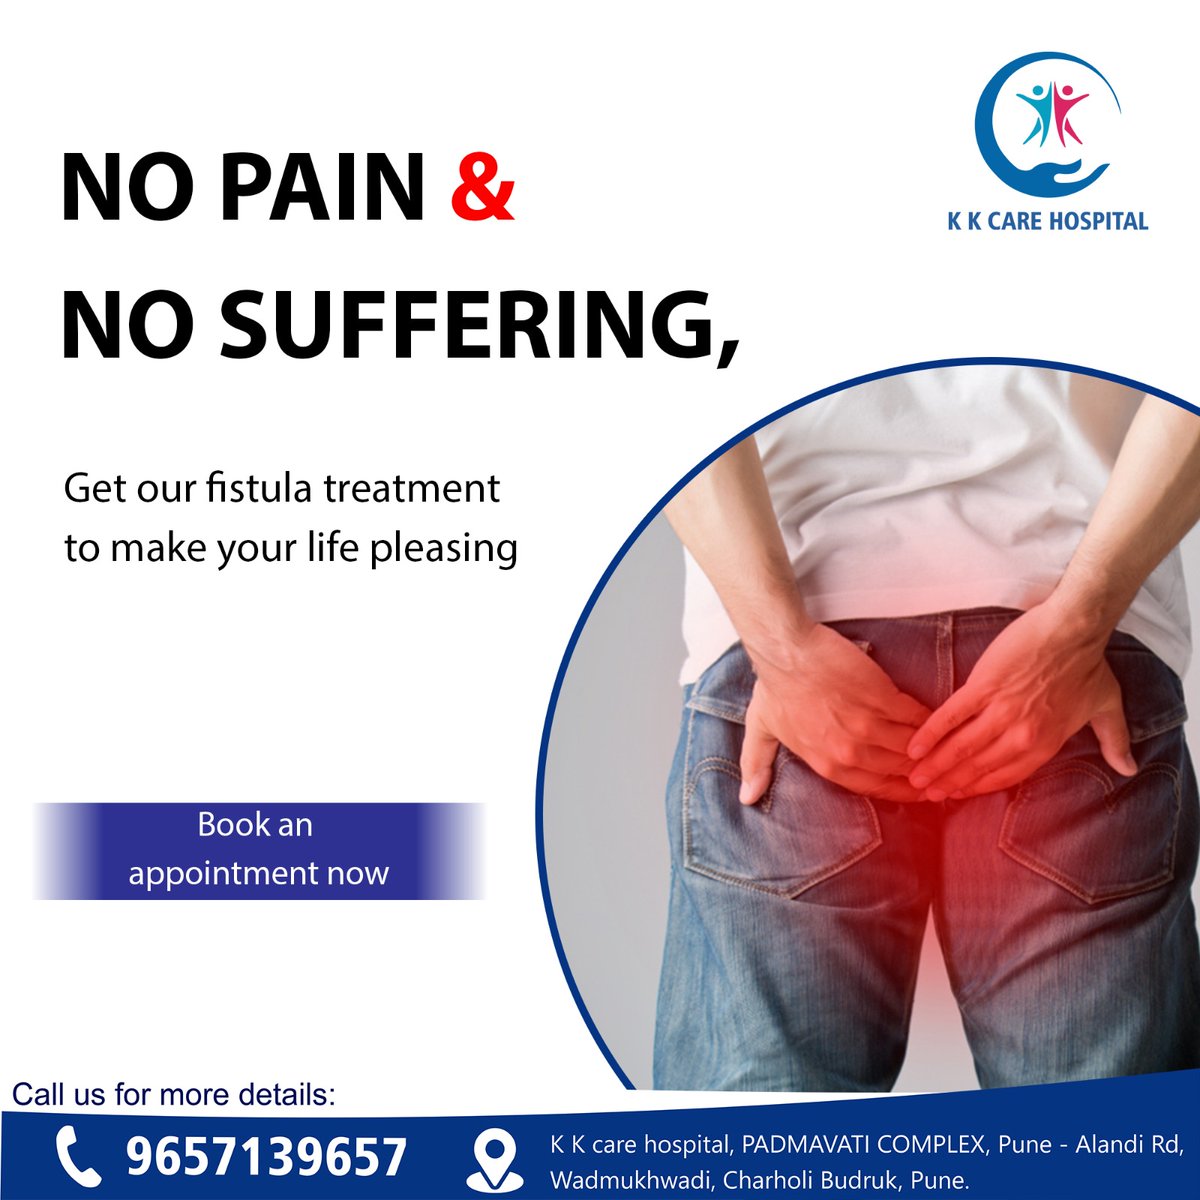 Say goodbye to fistula pain! Experience a life of comfort with our advanced fistula treatment.
Book an appointment now at K K Care Hospital in Charholi. 

#KKCareHospital #Charholi #FistulaTreatment #PainRelief #ComfortableLife #QualityCare #Healthcare #BookNow #ExpertTeam